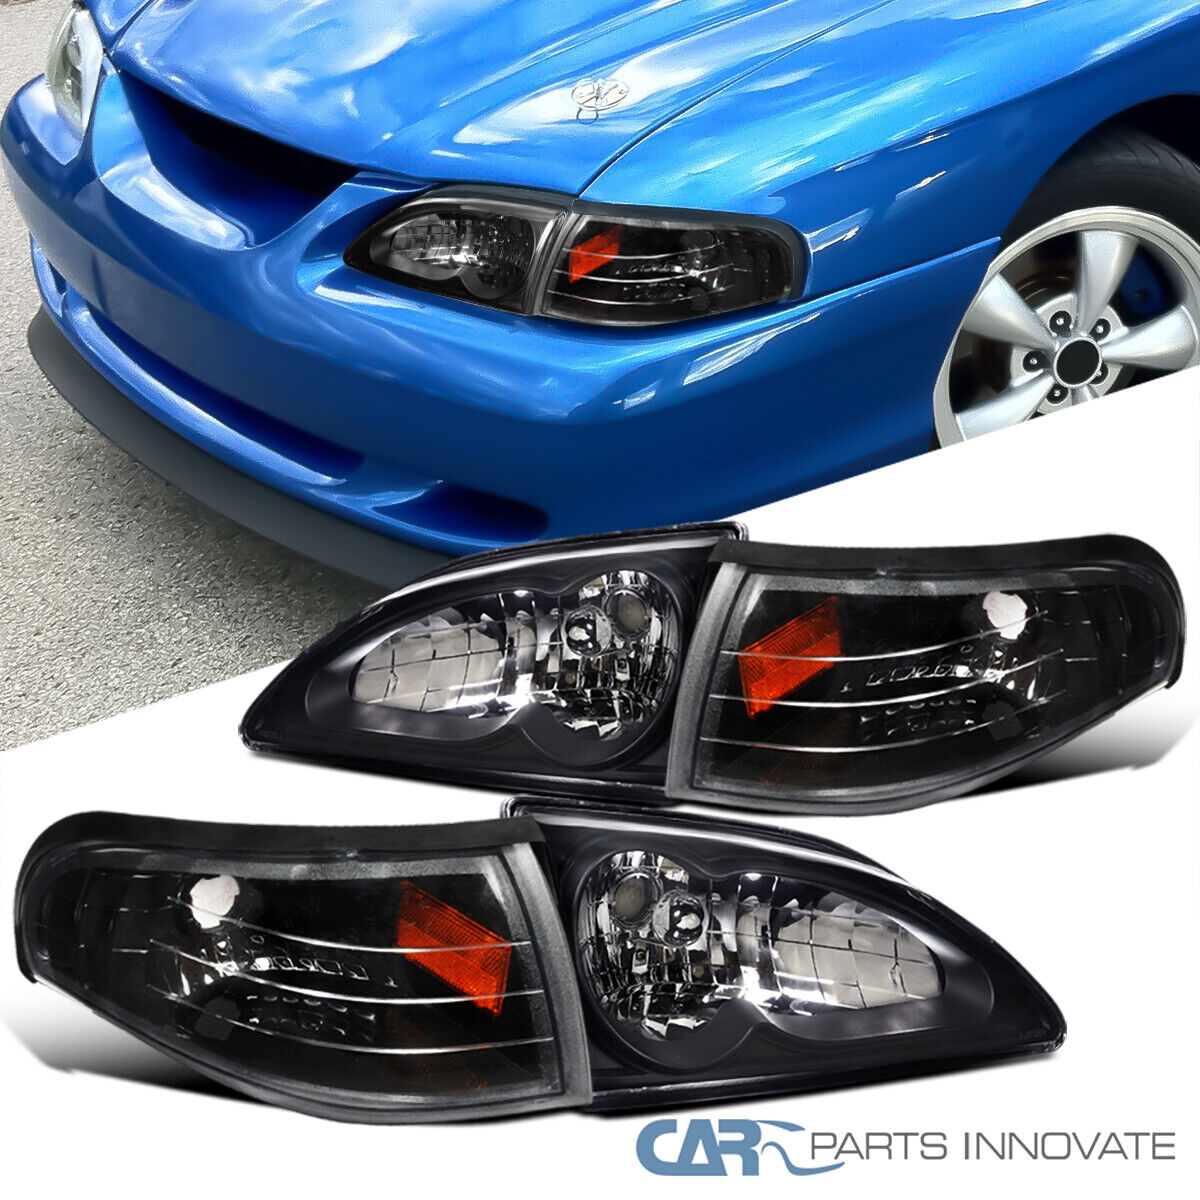 Fit Ford 94-98 Mustang GT SVT Headlights Black+Corner Turn Signal Lamps w/ Amber